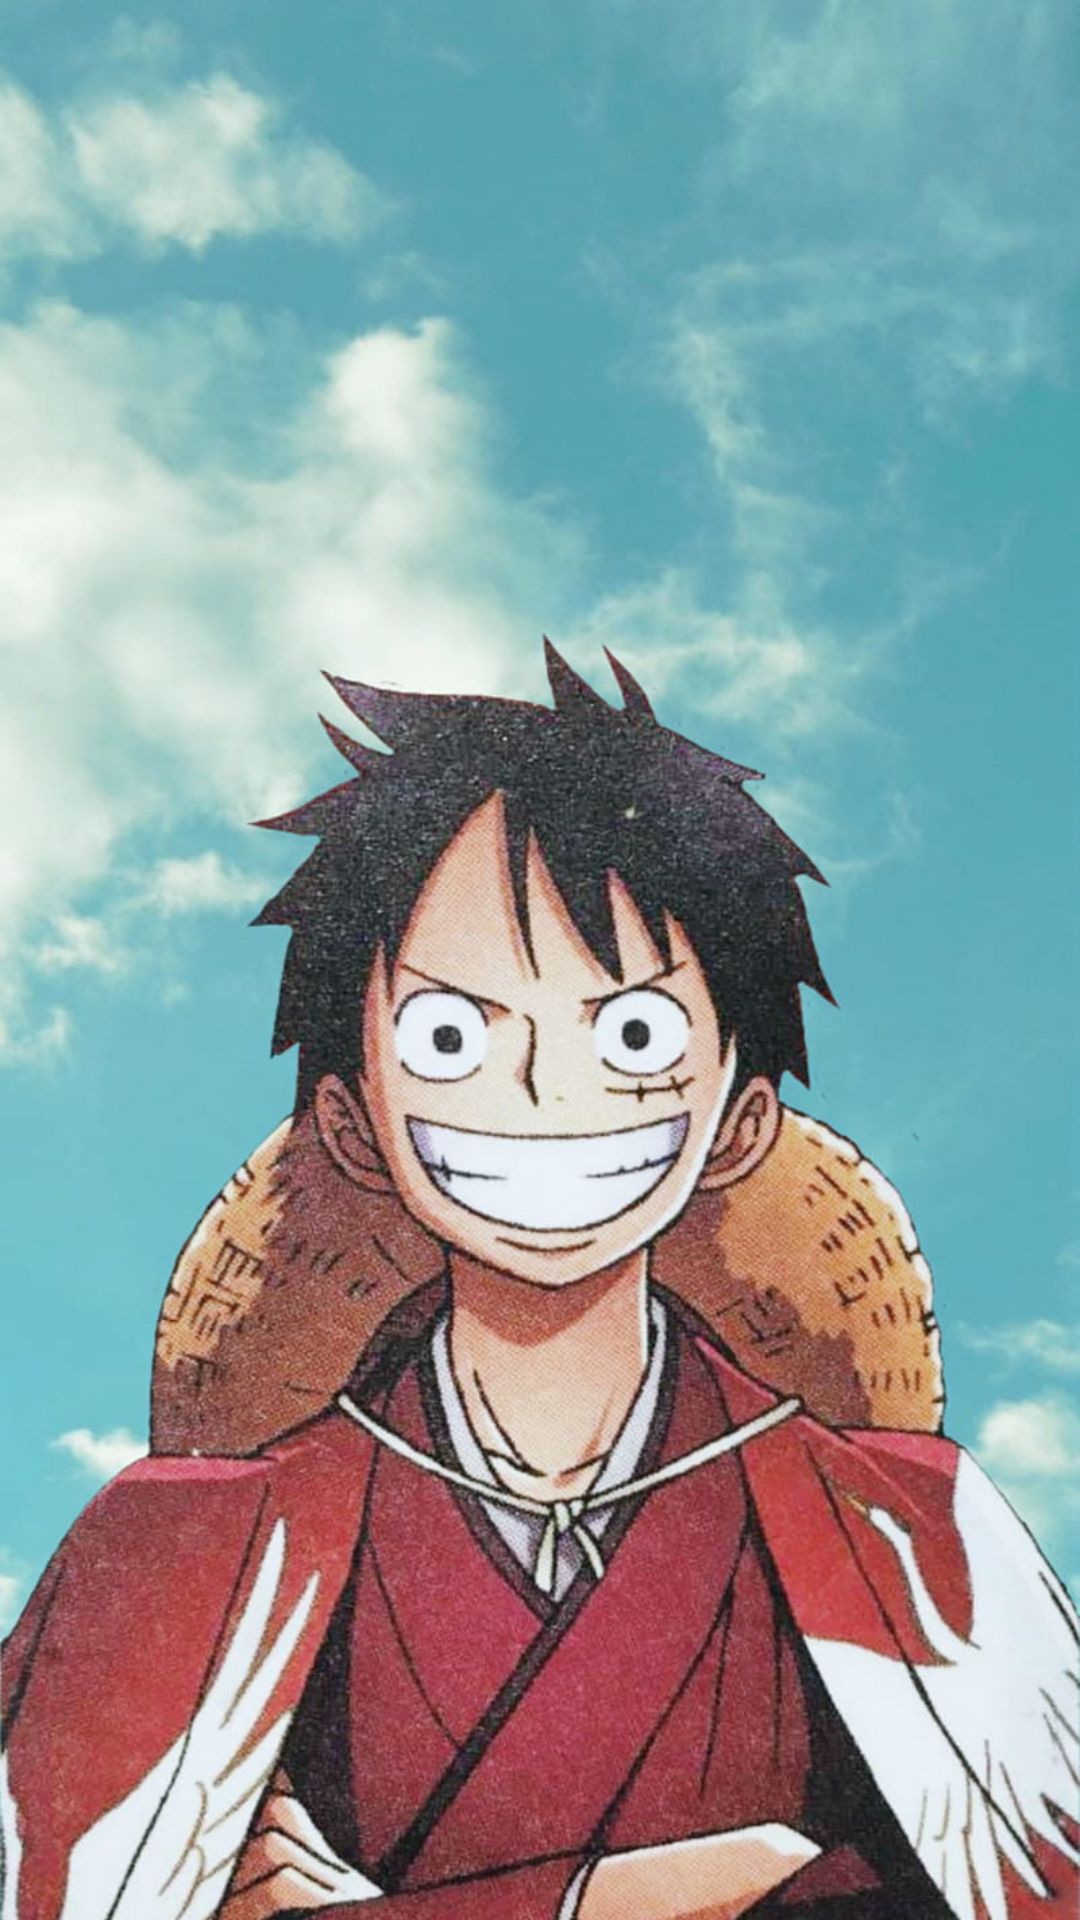 Wallpaper ID: 340678 / Anime One Piece Phone Wallpaper, Monkey D. Luffy,  Straw Hat, 1200x2000 free download